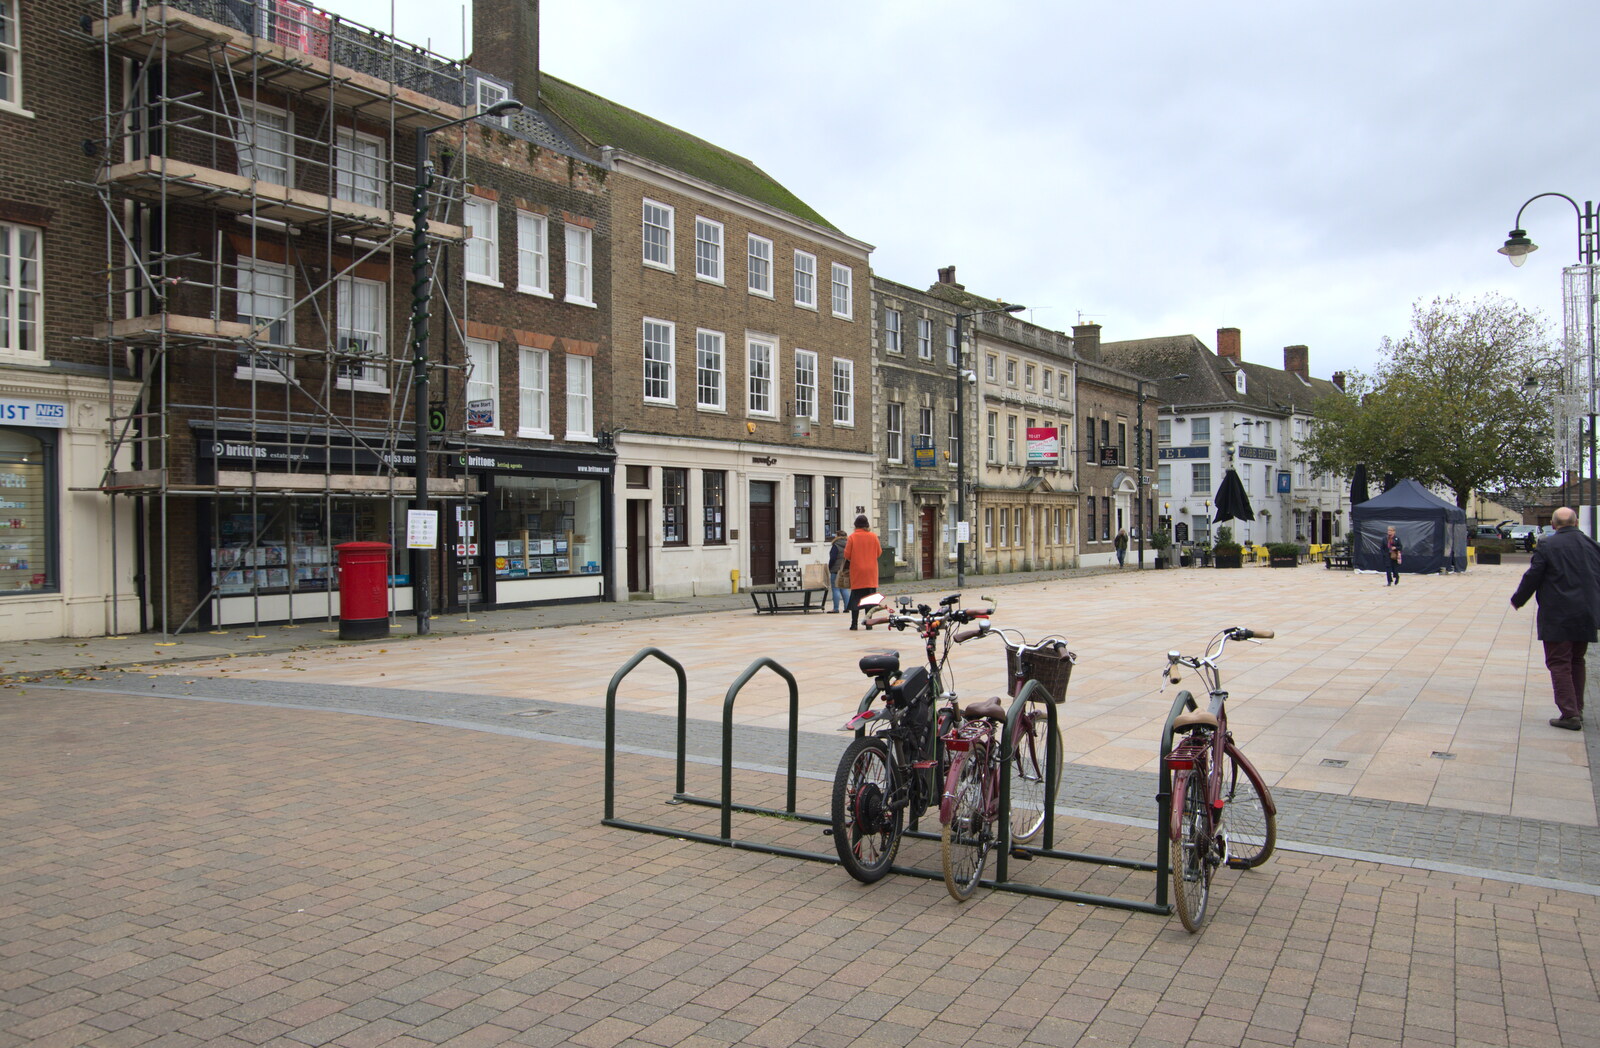 A bike rack in a square from A Postcard From Kings Lynn and "Sunny Hunny" Hunstanton, Norfolk - 31st October 2020